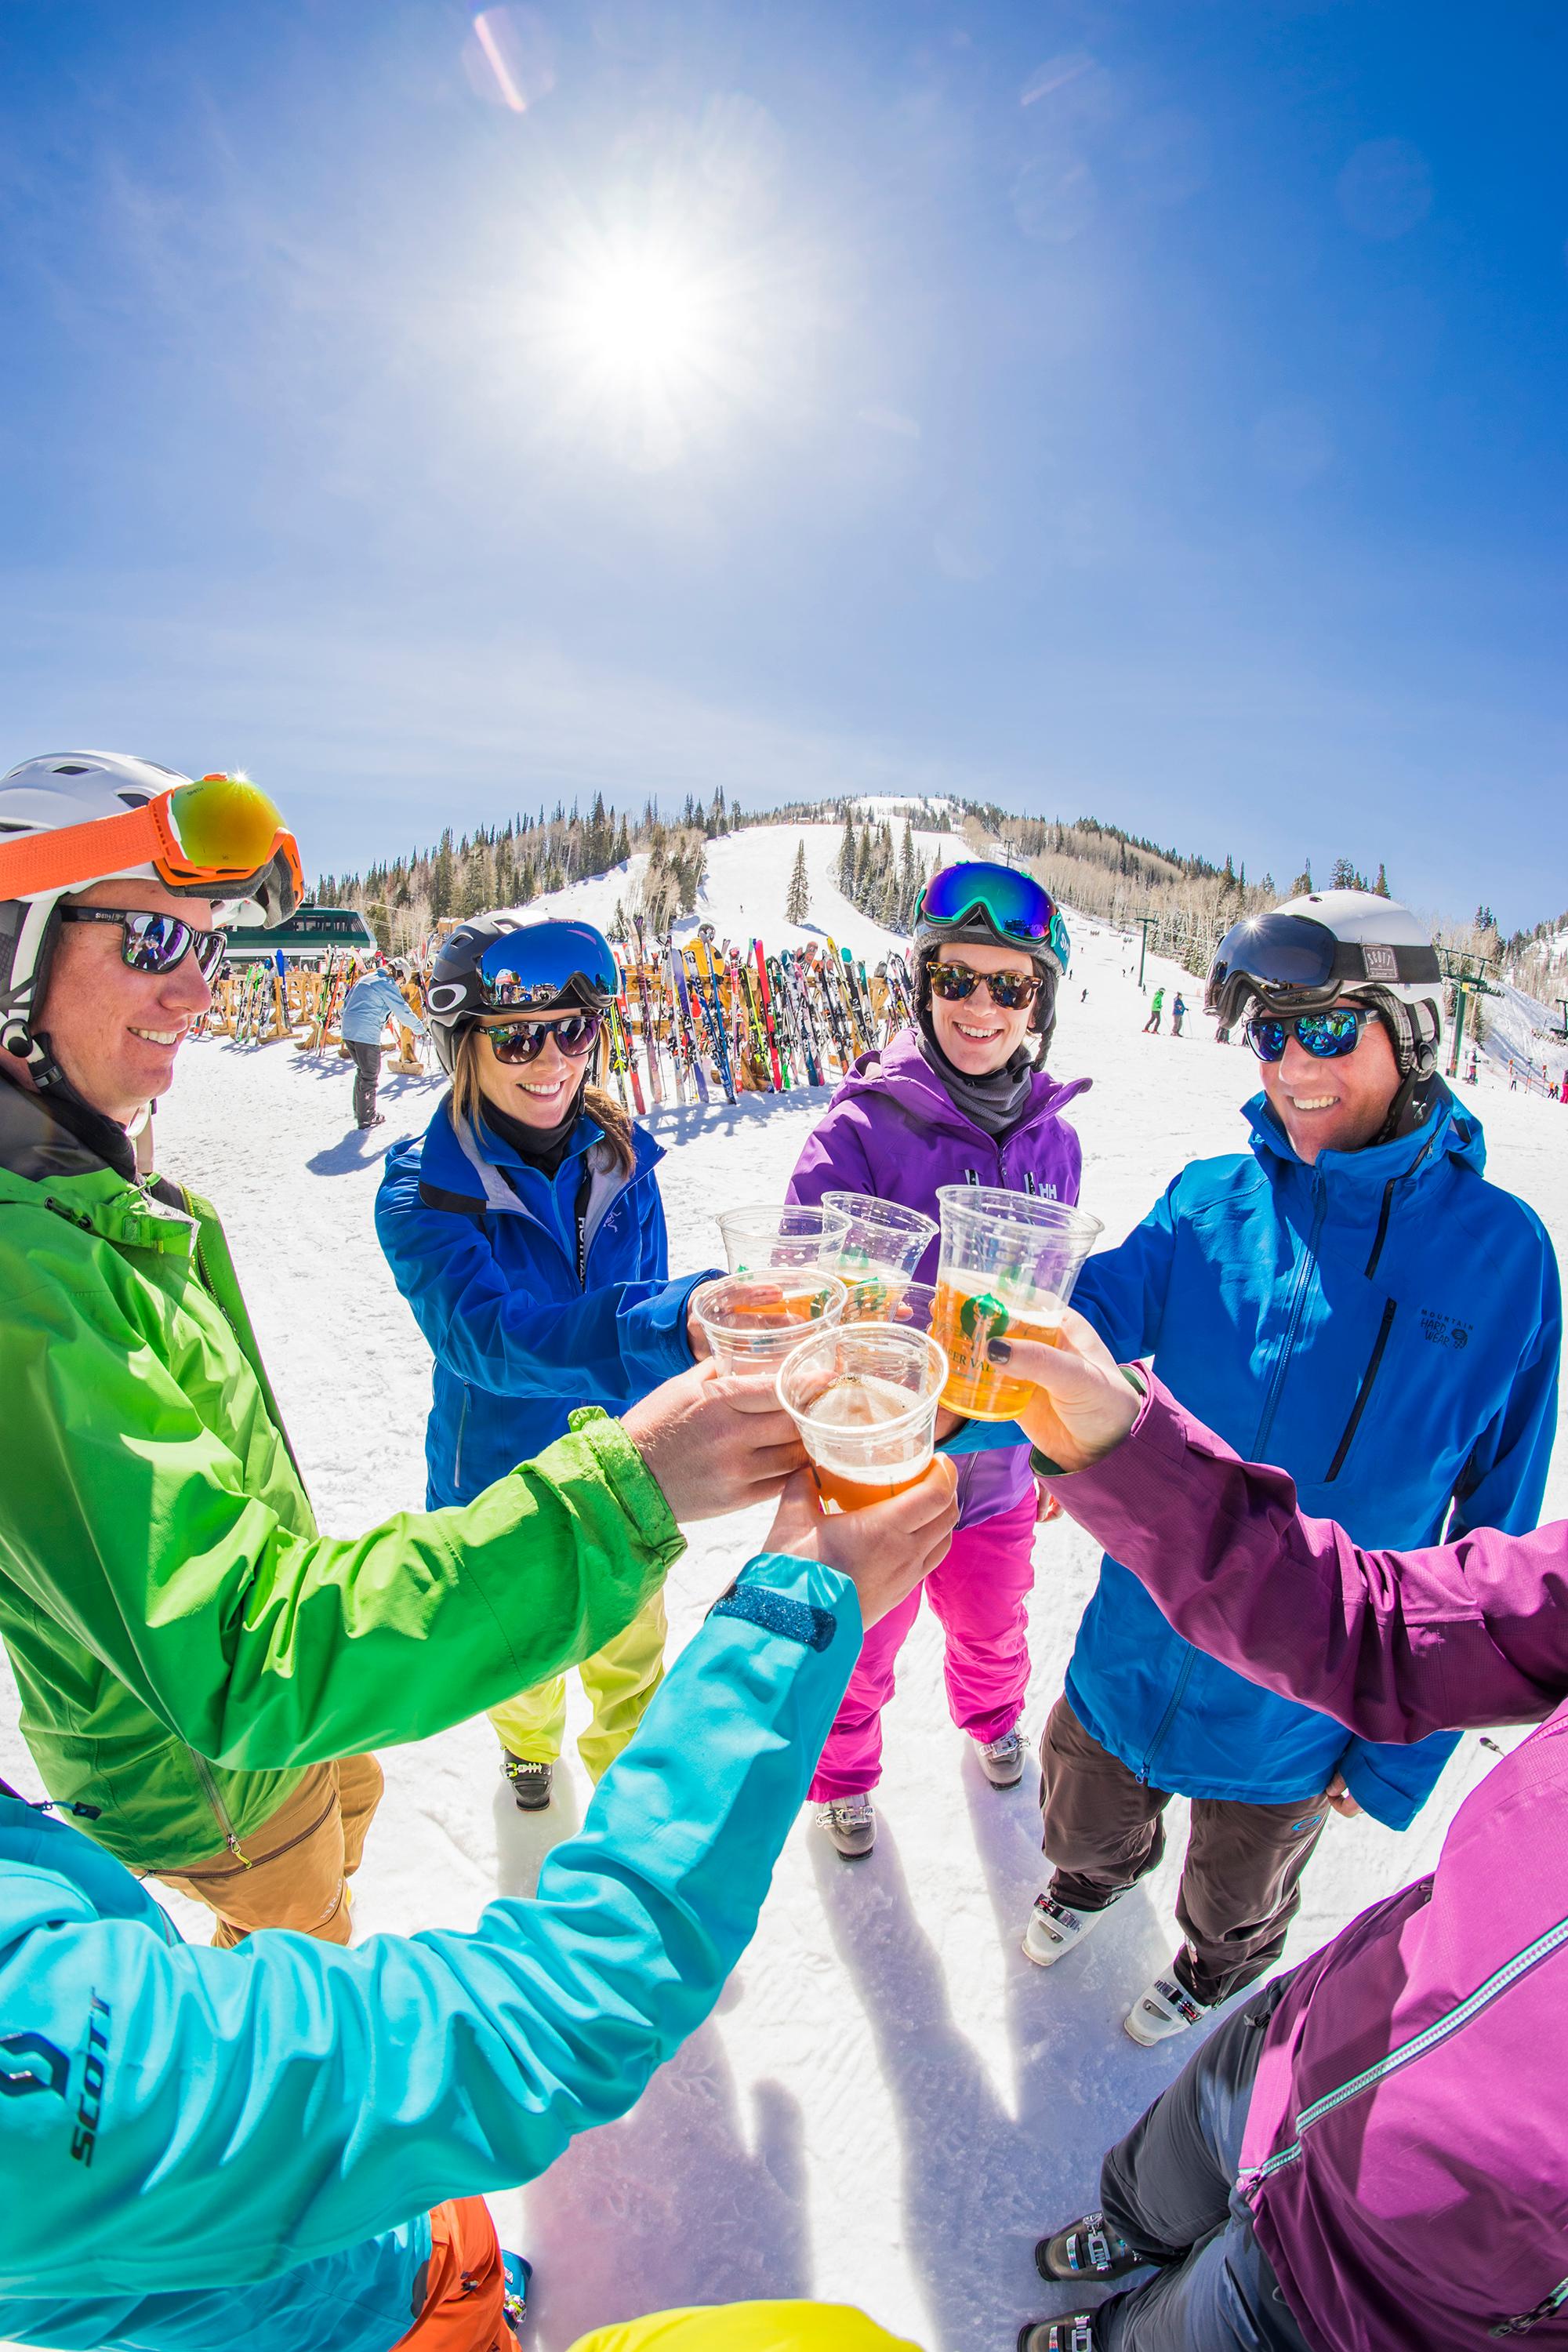 Group of people in ski gear toasting with beers at the base of a mountain